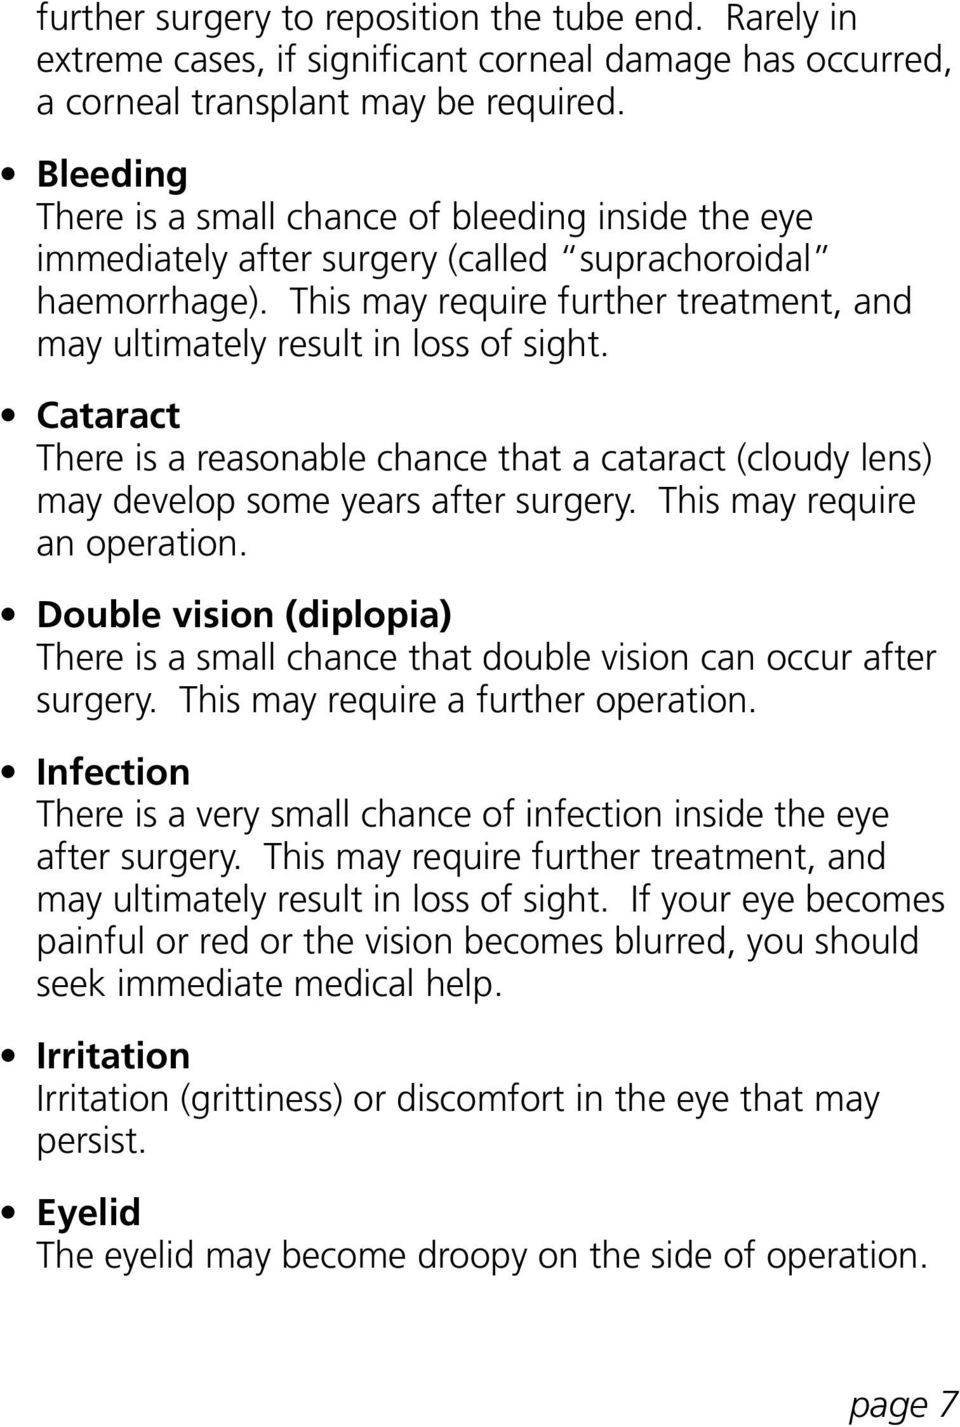 This may require further treatment, and may ultimately result in loss of sight. Cataract There is a reasonable chance that a cataract (cloudy lens) may develop some years after surgery.